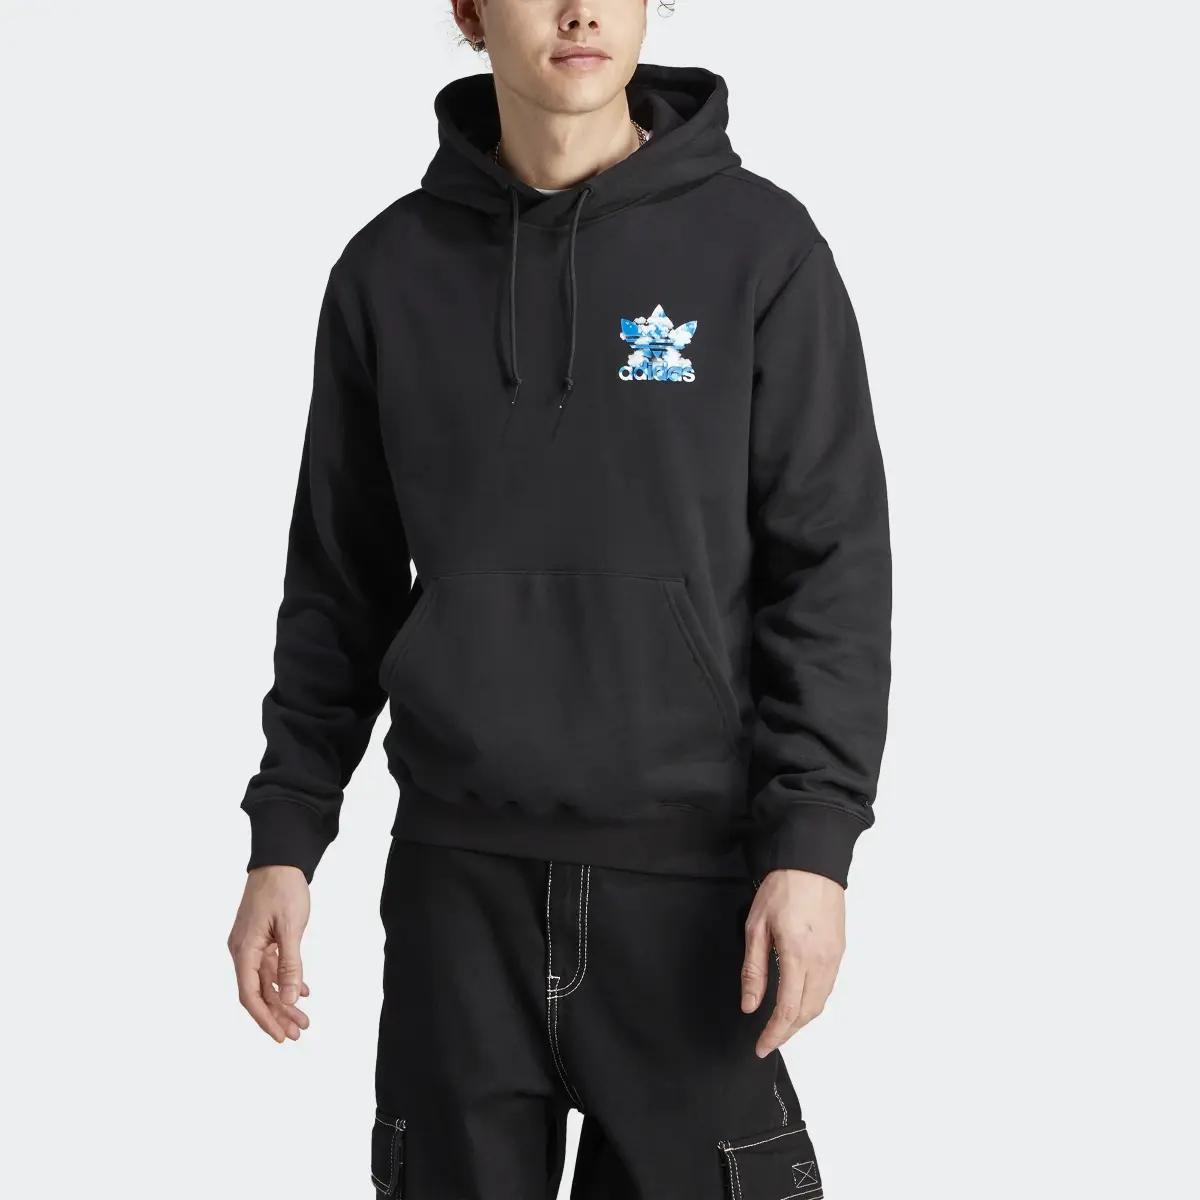 Adidas Graphics Cloudy Trefoil Hoodie. 1